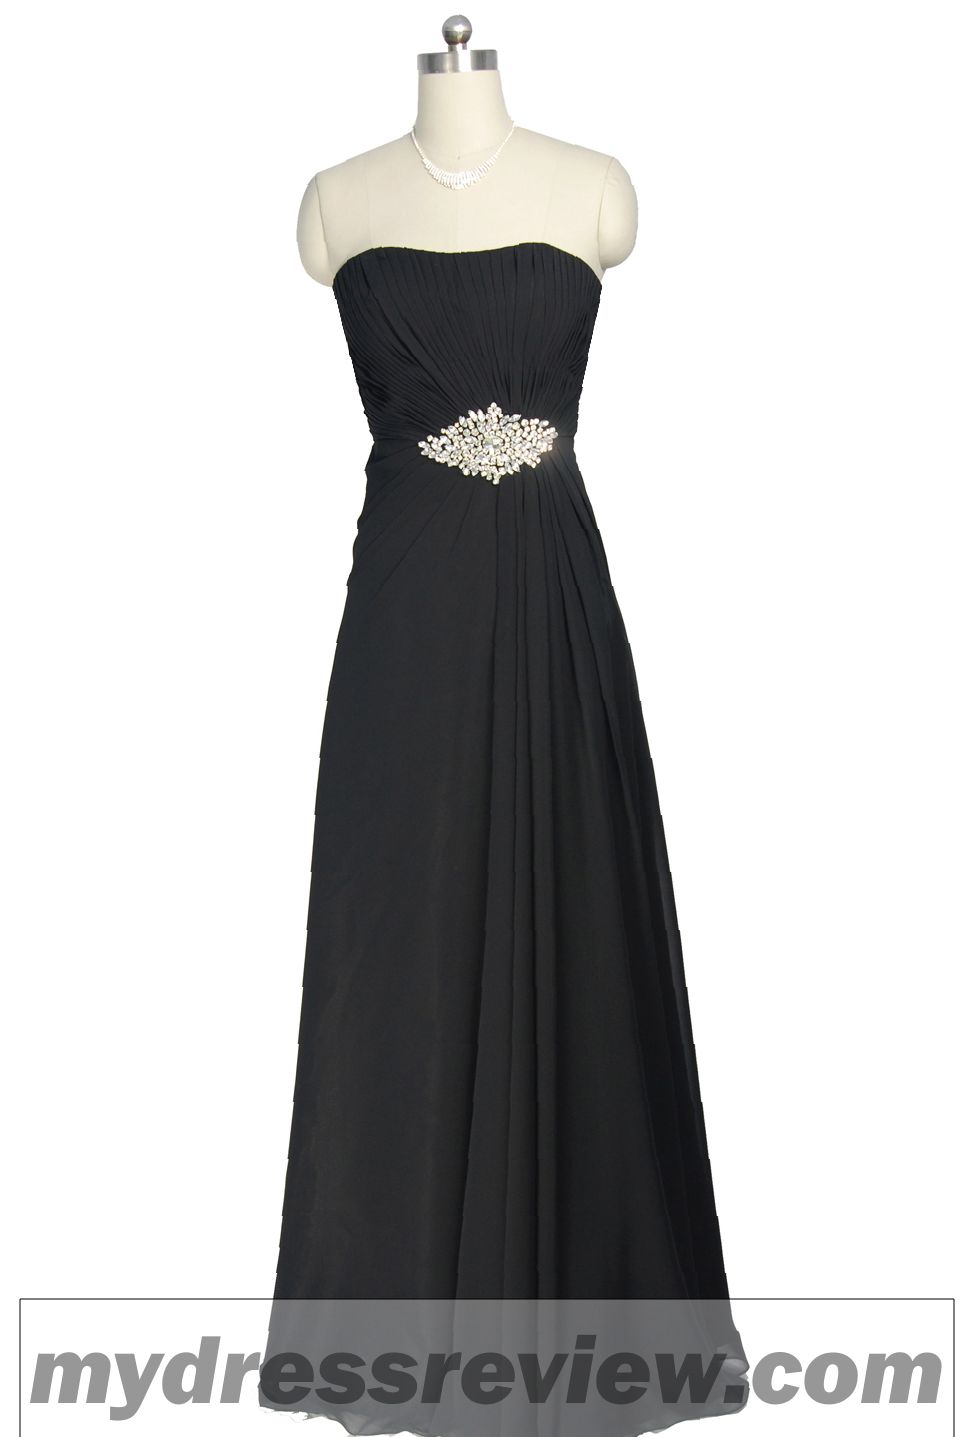 Elegant Long Black Evening Dresses & Where To Find In 2017